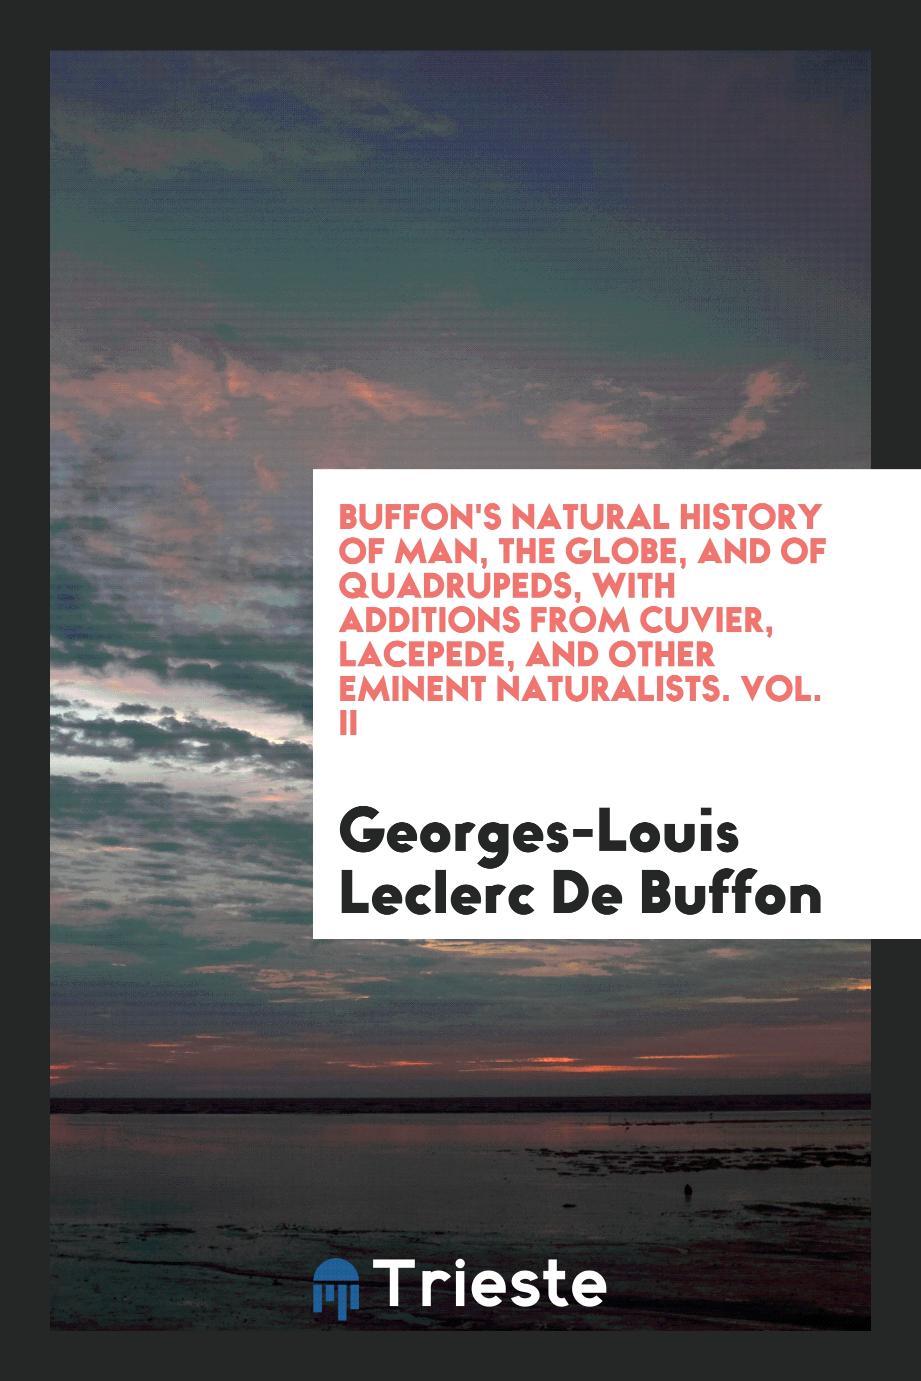 Buffon's Natural History of Man, the Globe, and of Quadrupeds, with Additions from Cuvier, Lacepede, and Other Eminent Naturalists. Vol. II